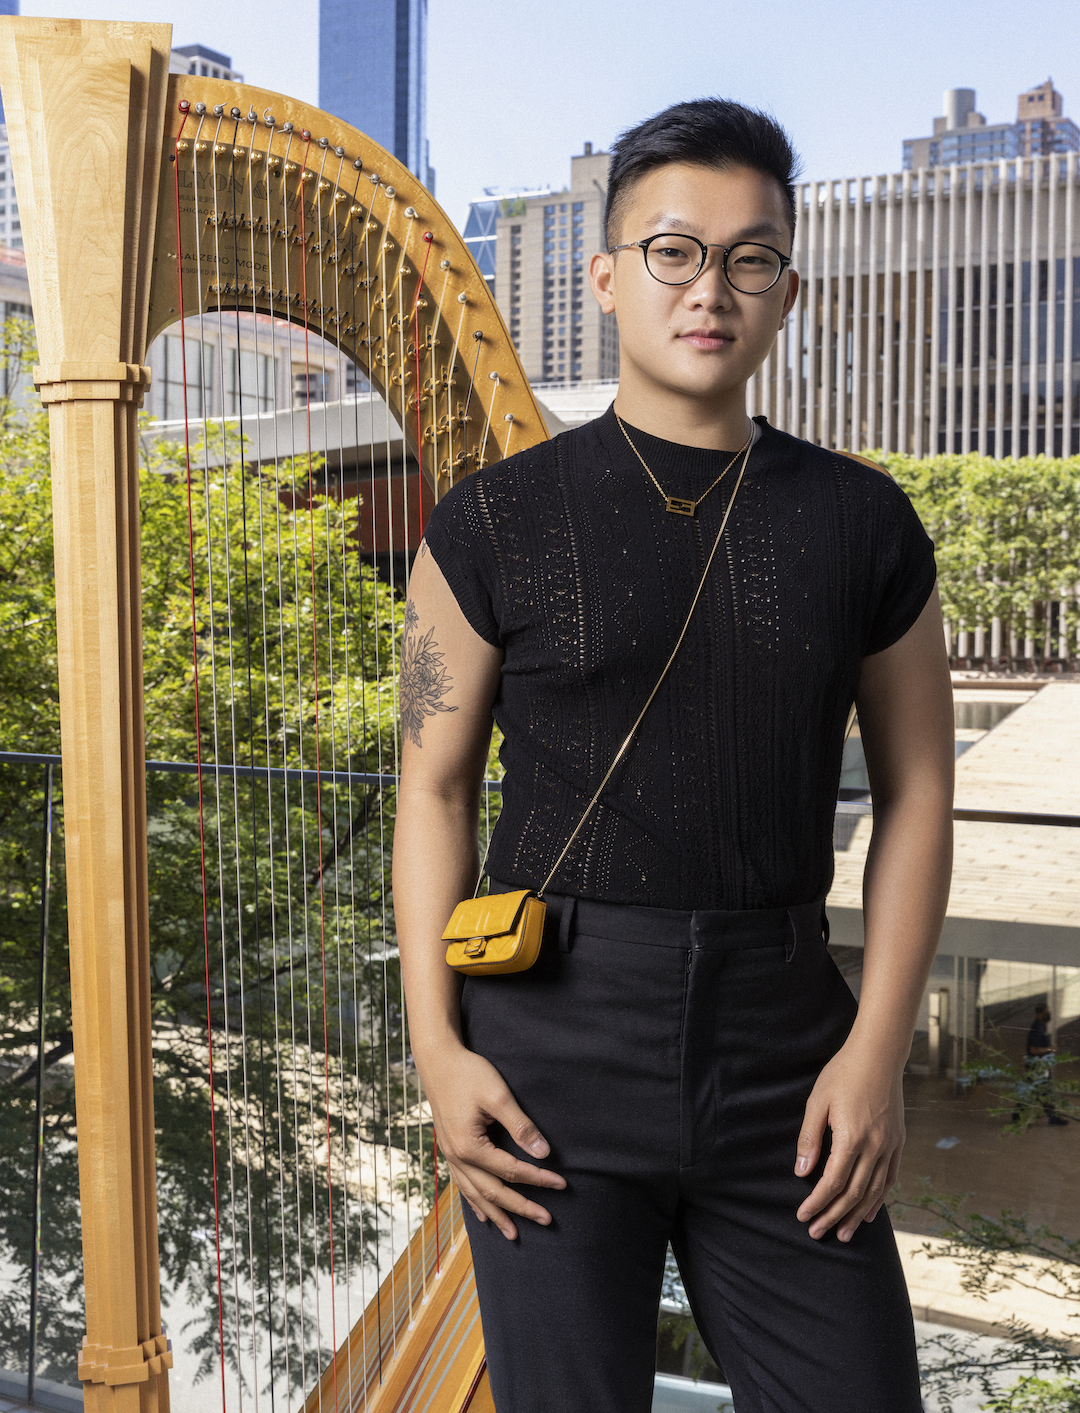 A harp player wearing Fendi attire poses with his harp outside